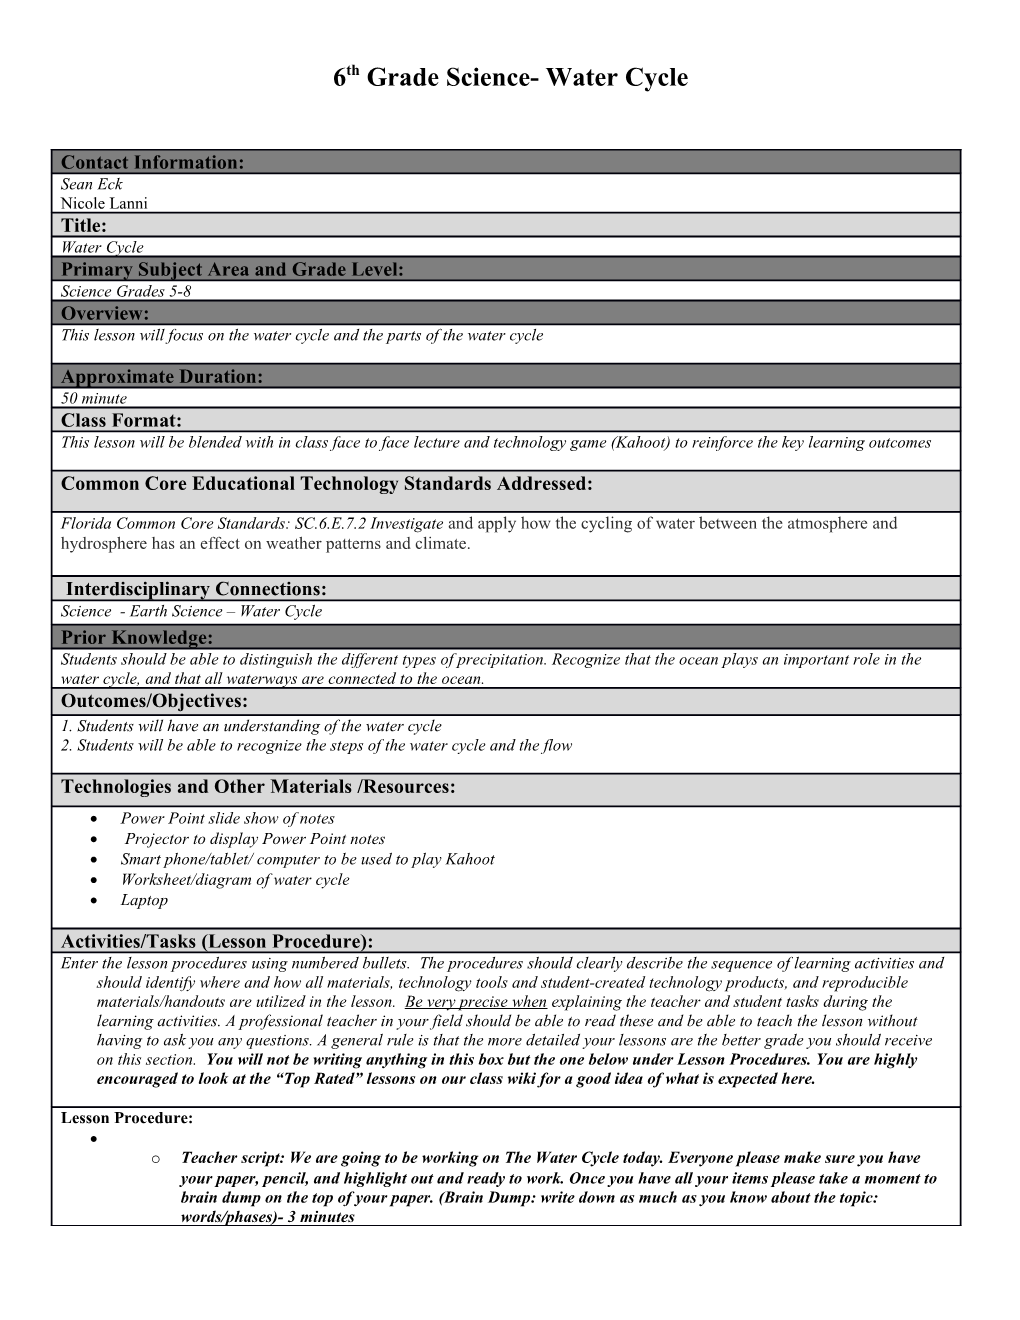 Making Connections Lesson Plan Template